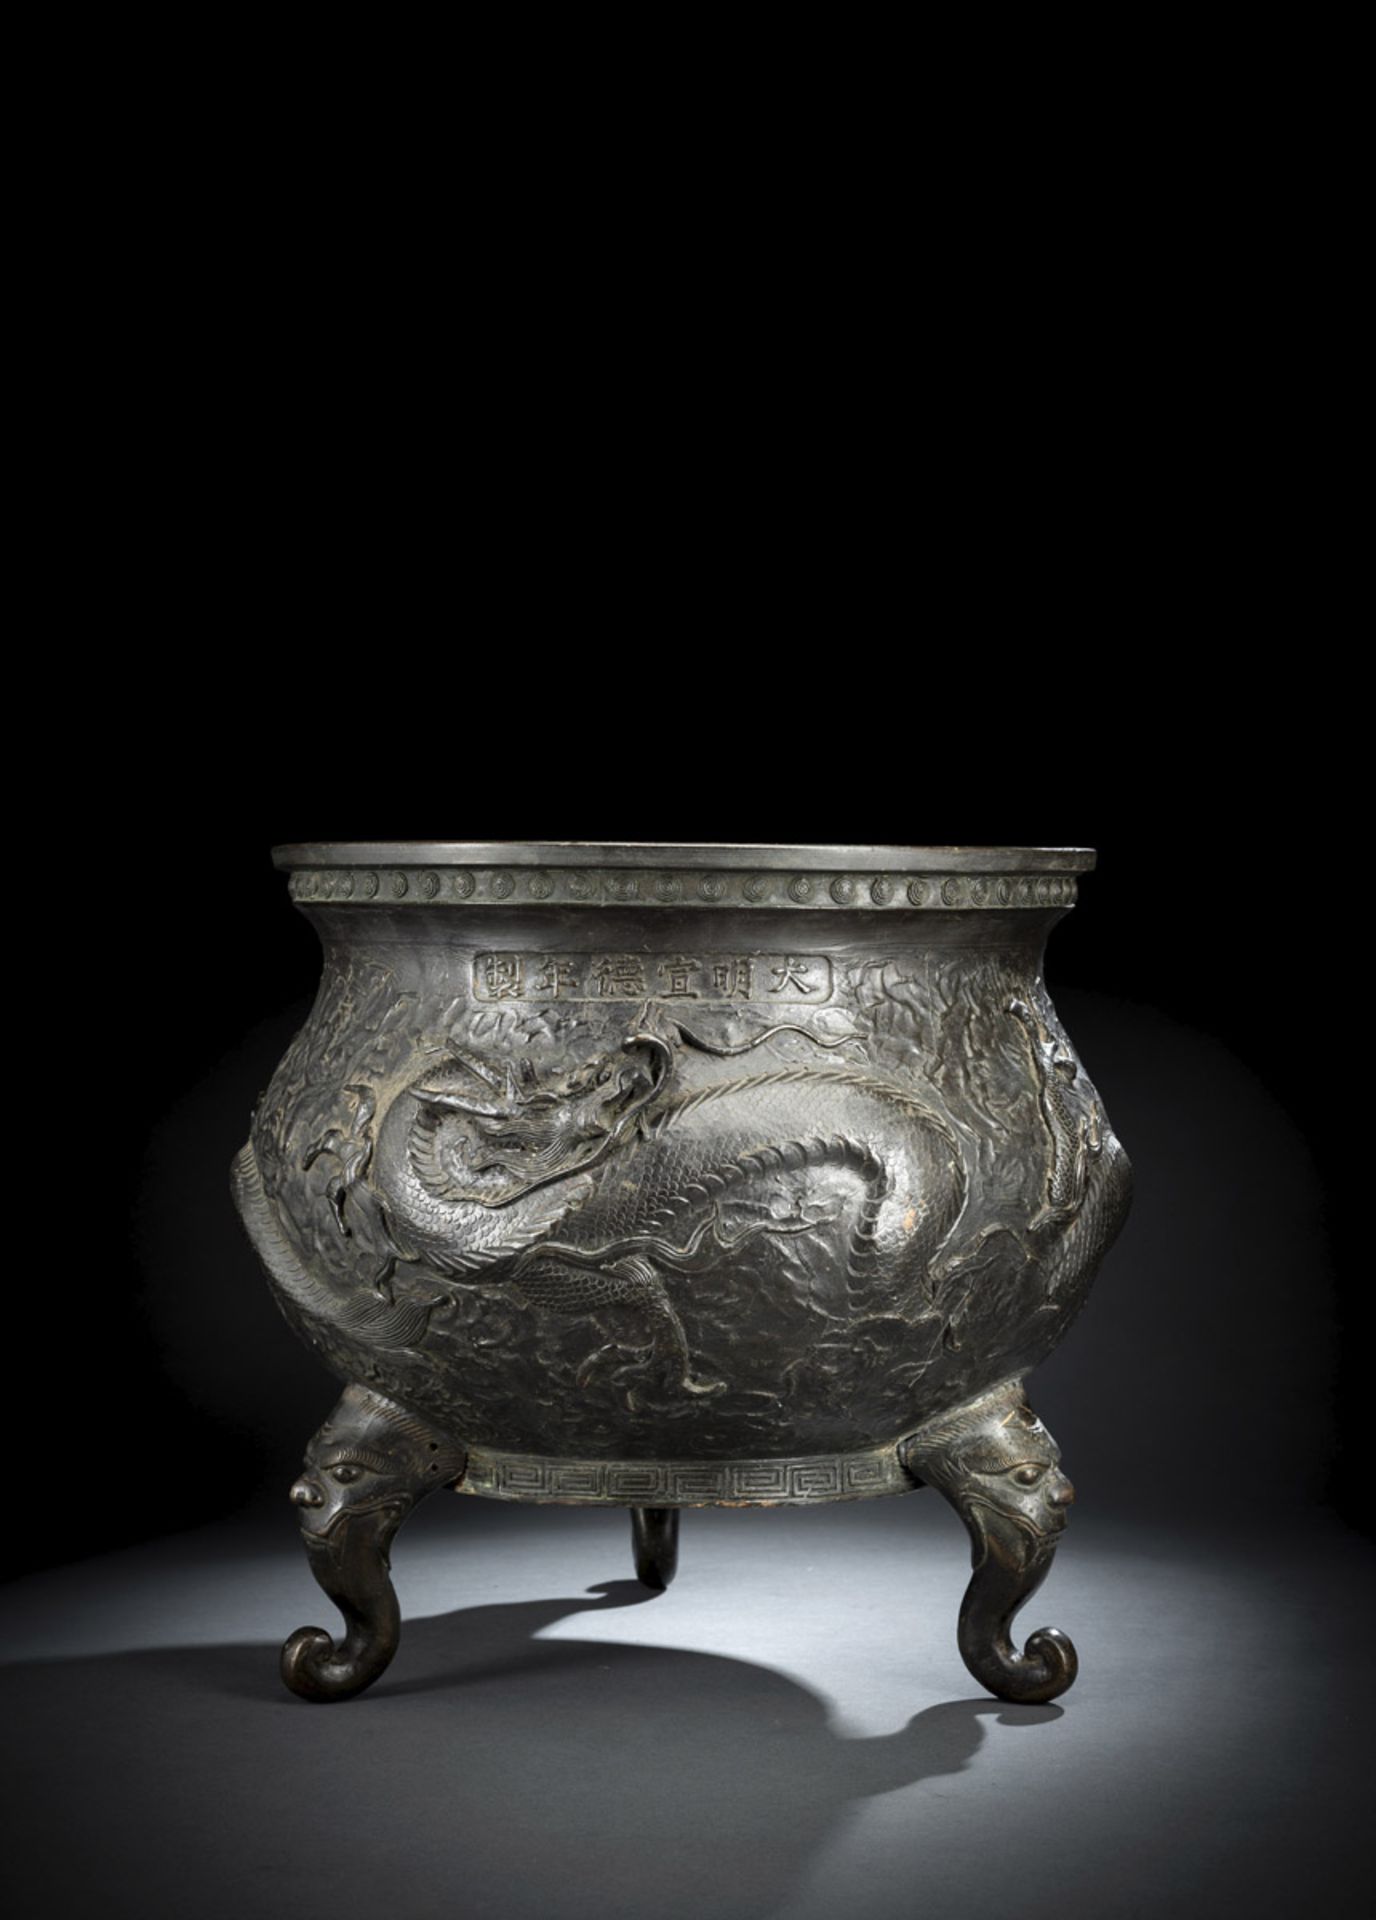 A BRONZE CENSER OR CONTAINER FOR COAL WITH DRAGON DECORATION - Image 2 of 2